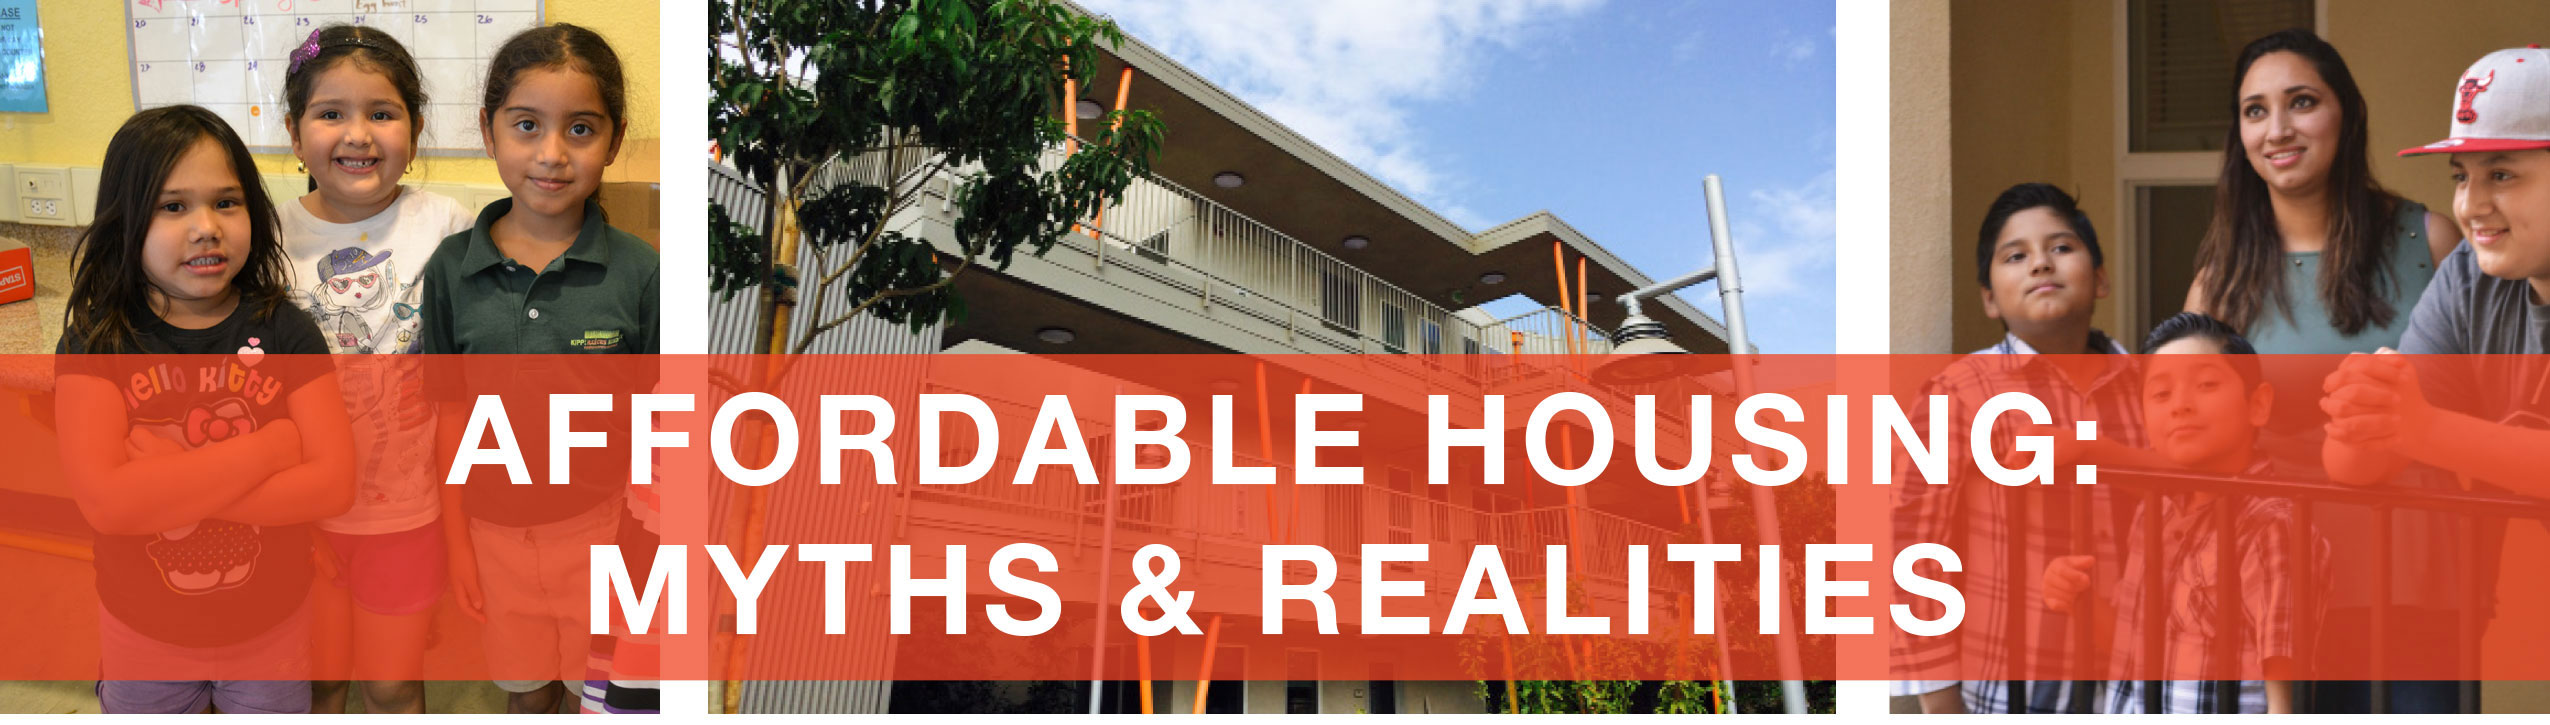 affordable housing myths vs realities